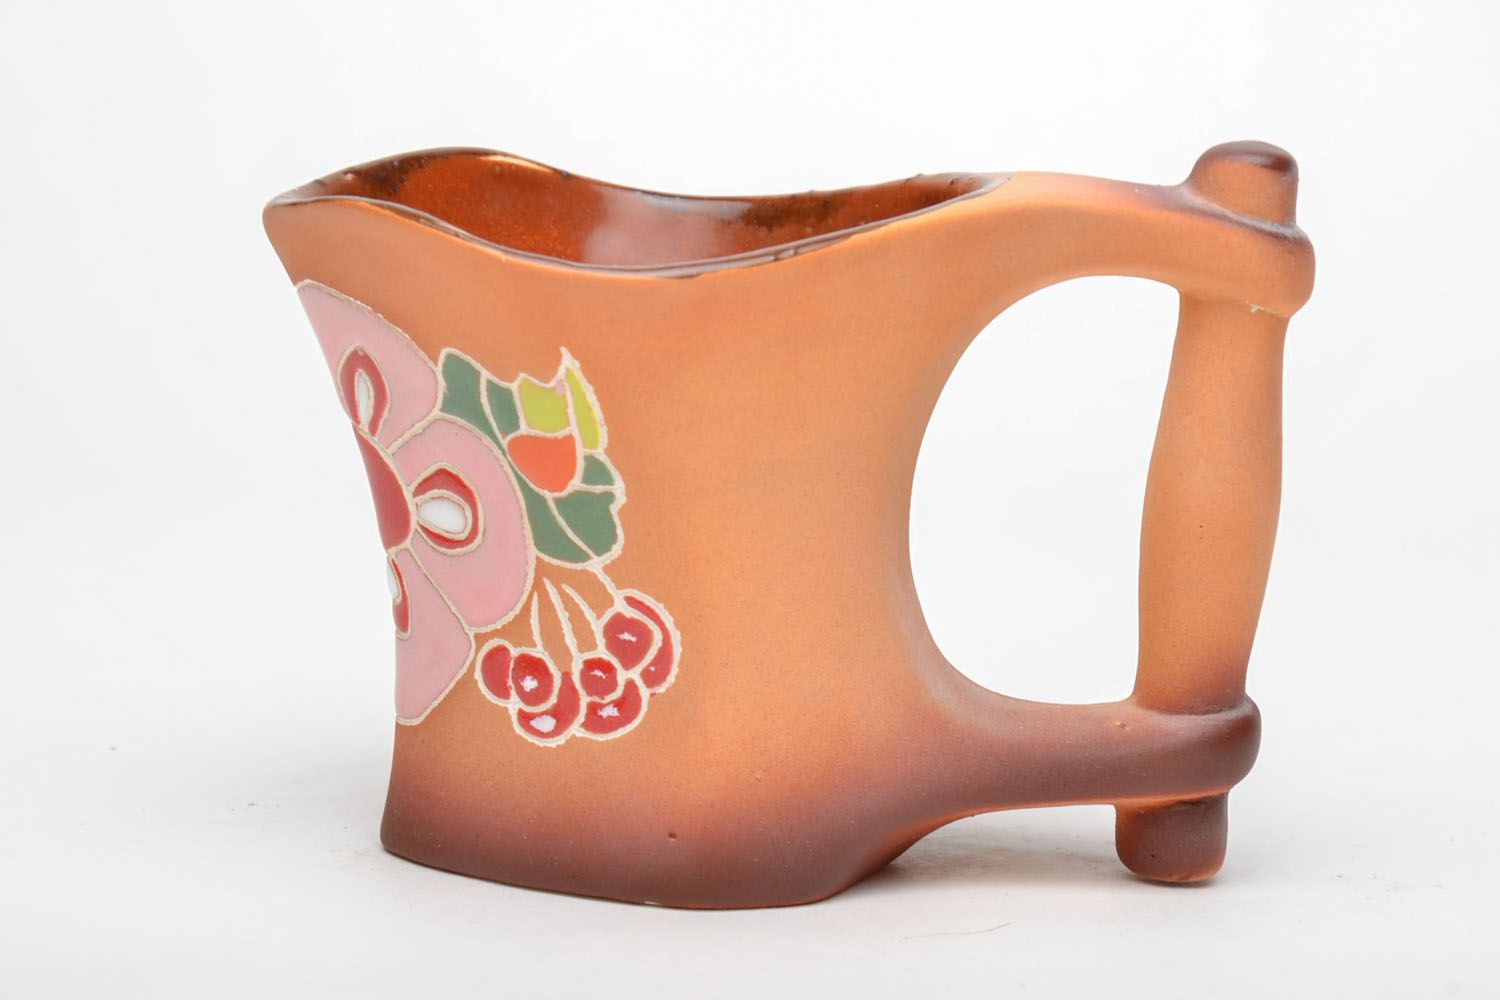 8 oz clay handmade art drinking cup with a wide handle and floral pattern photo 2